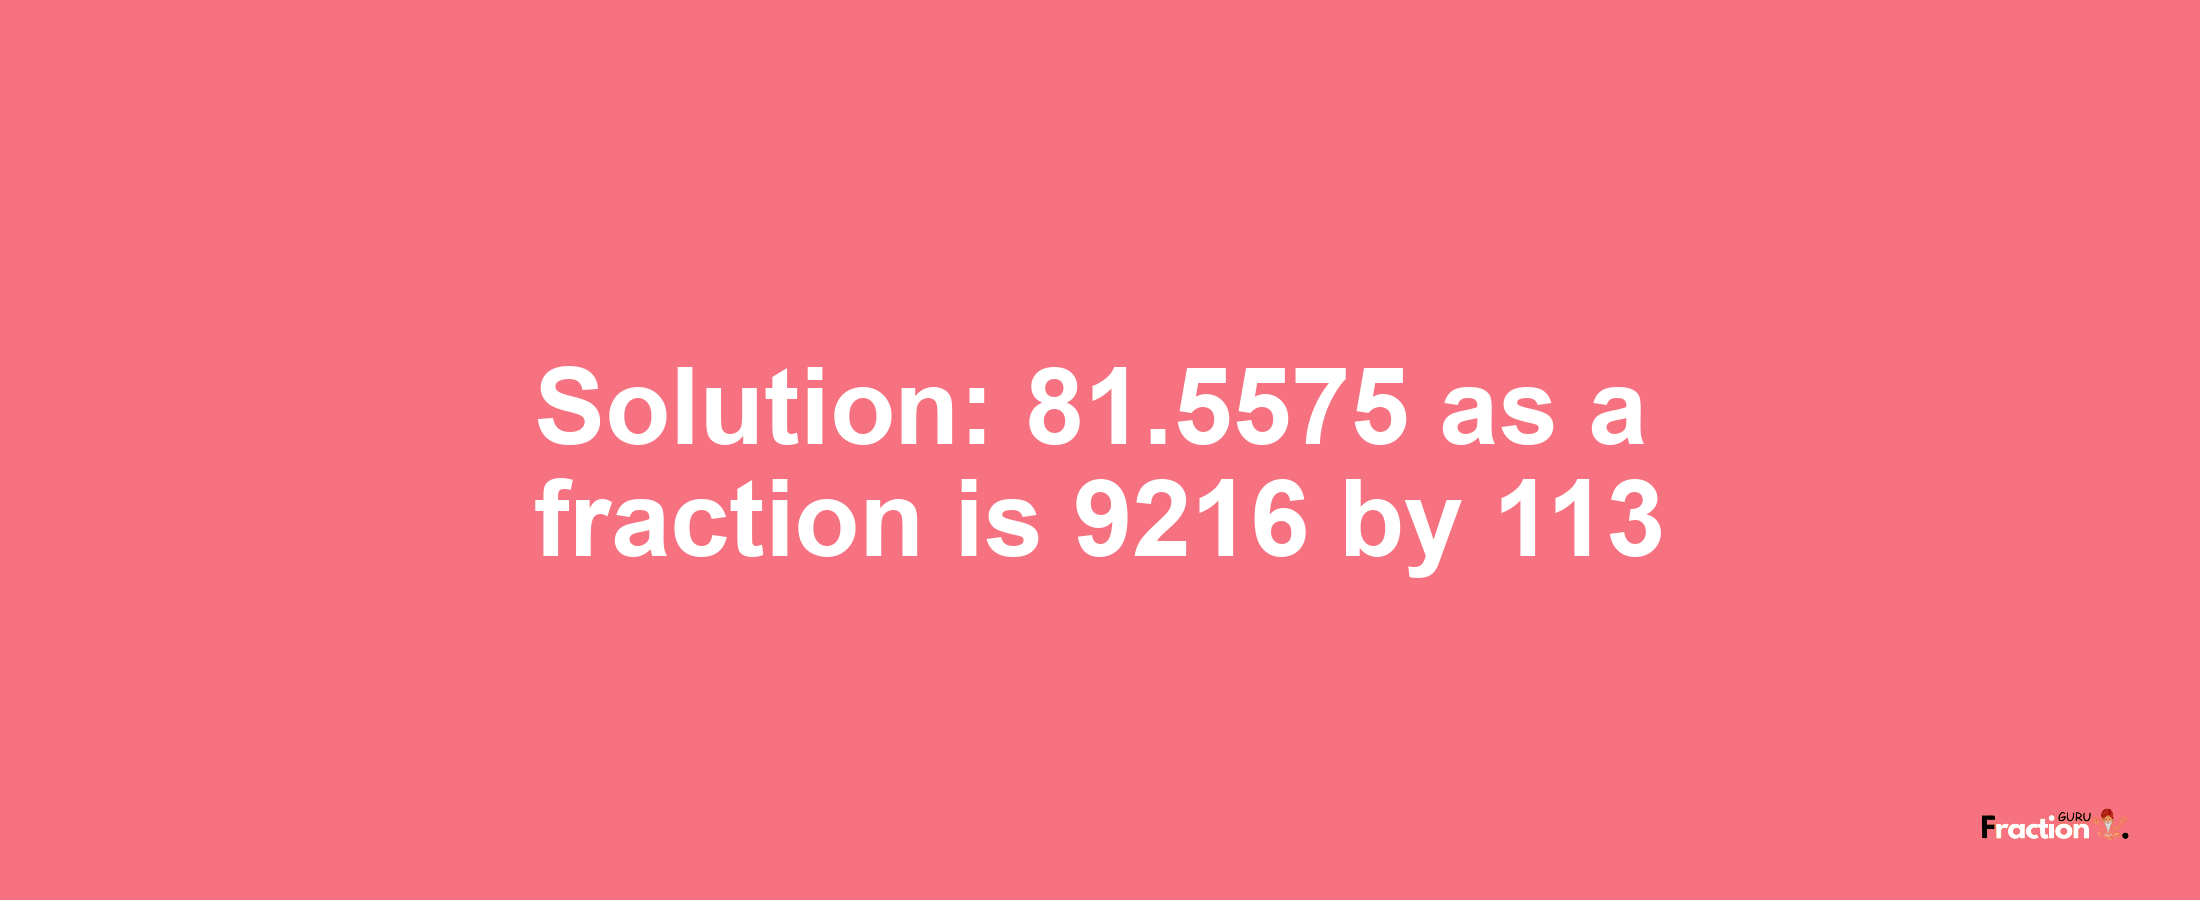 Solution:81.5575 as a fraction is 9216/113